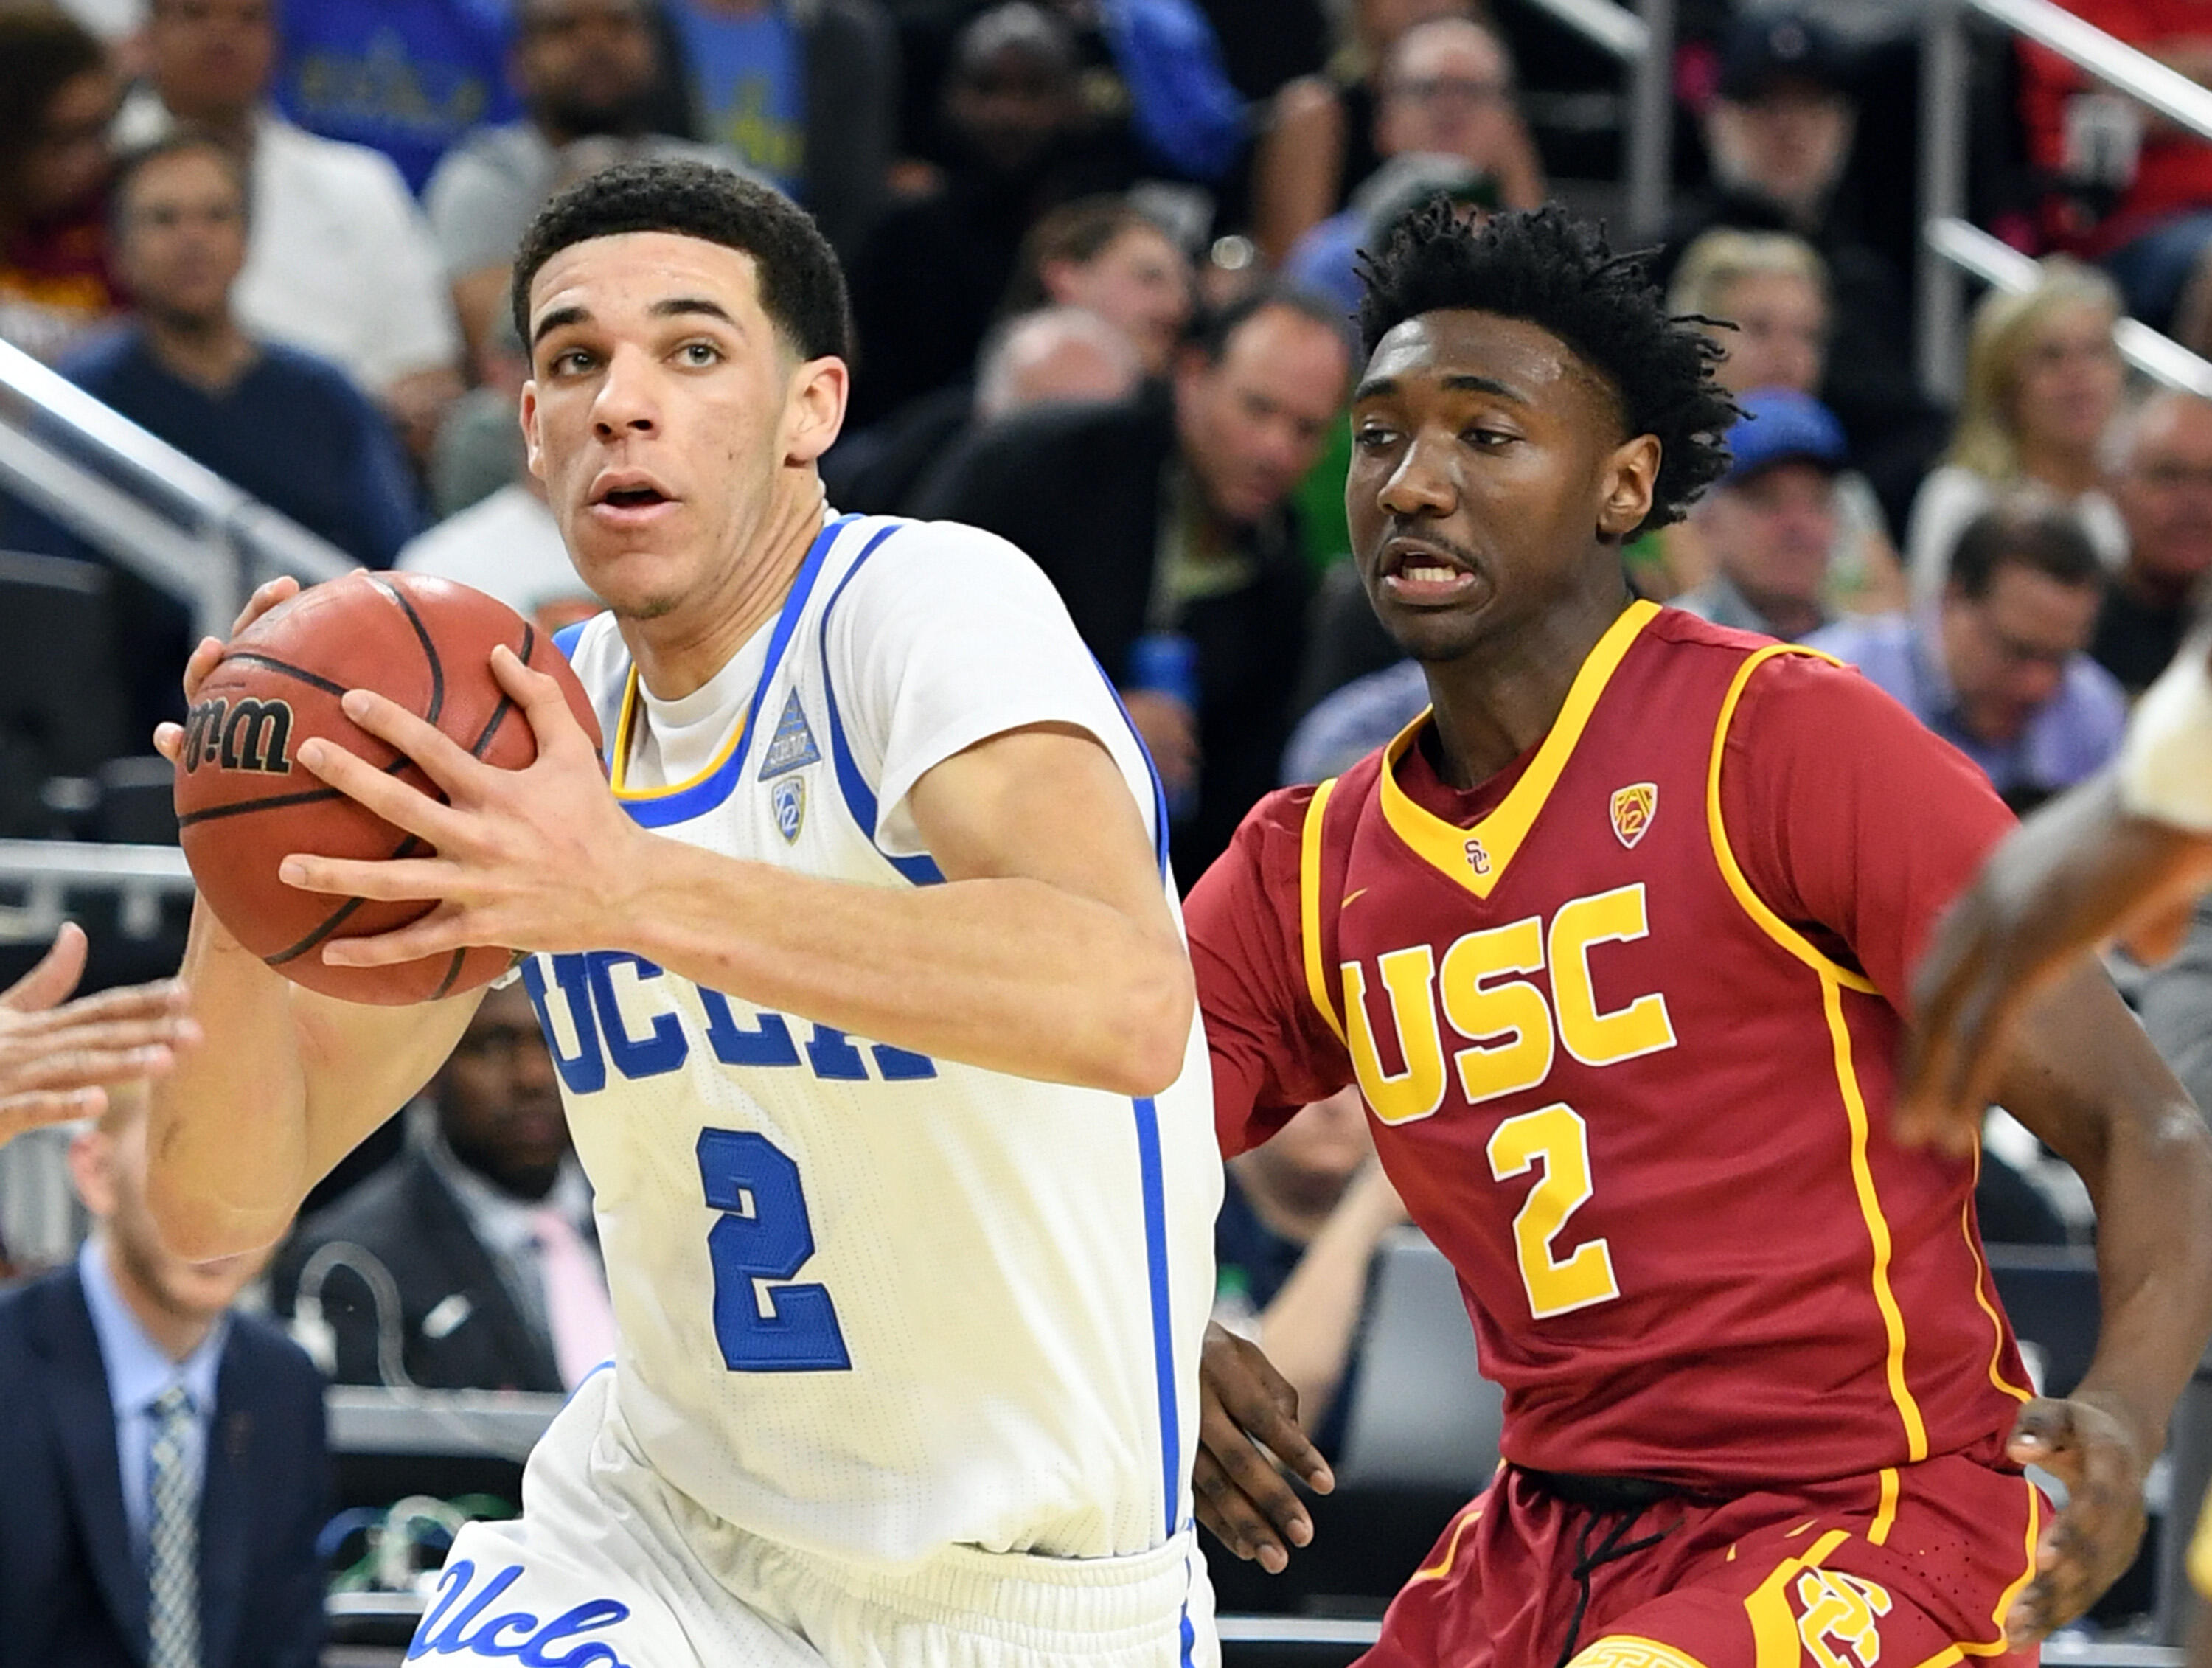 LAS VEGAS, NV - MARCH 09:  Lonzo Ball #2 of the UCLA Bruins drives to the basket against Jonah Mathews #2 of the USC Trojans during a quarterfinal game of the Pac-12 Basketball Tournament at T-Mobile Arena on March 9, 2017 in Las Vegas, Nevada. UCLA won 7